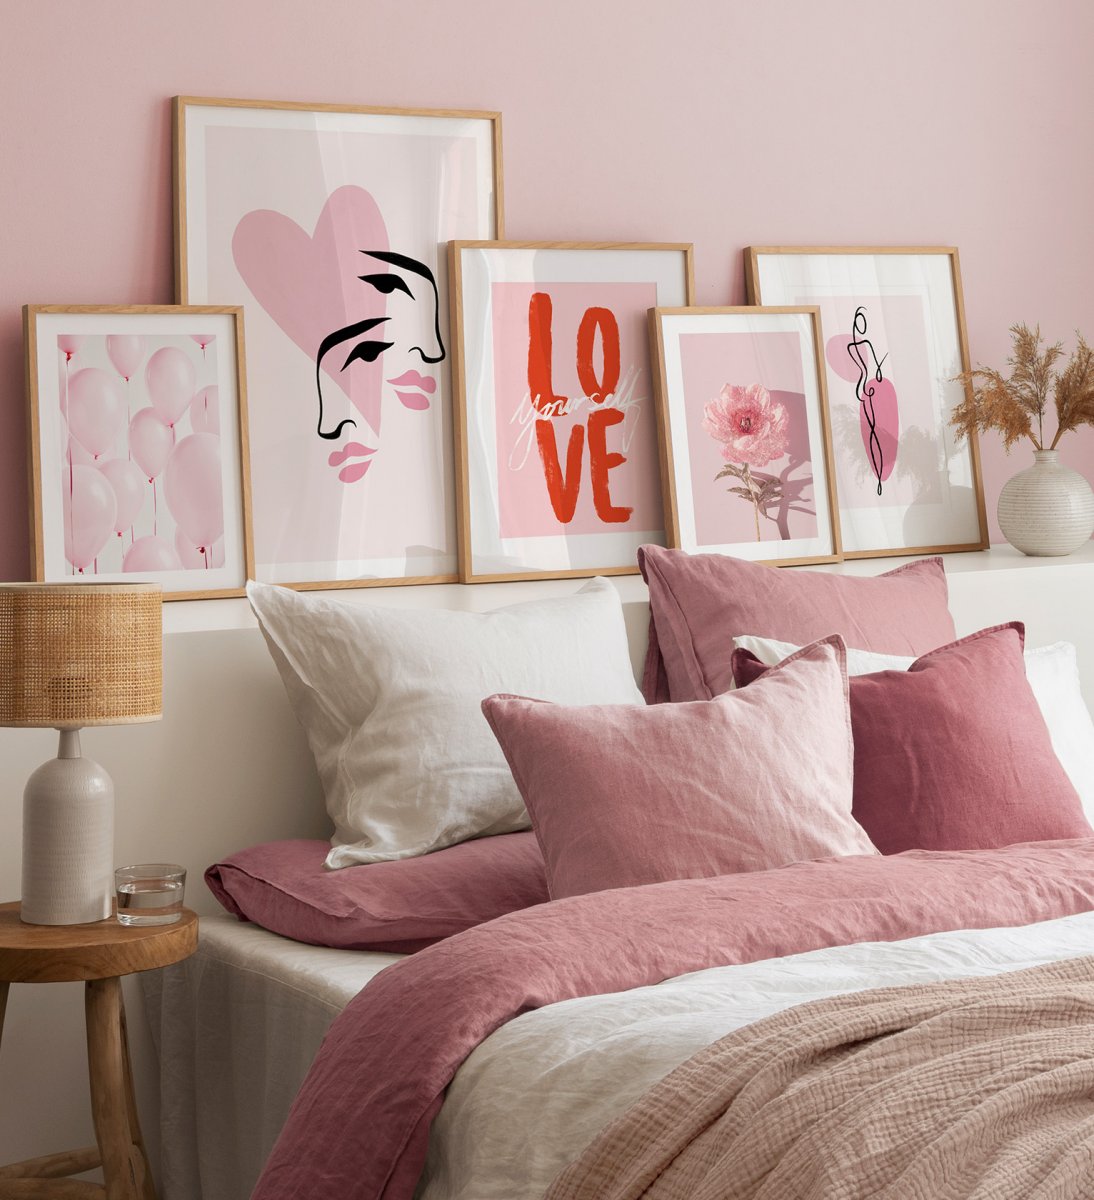 Gallery wall in pink with illustrations and photographs of flowers 